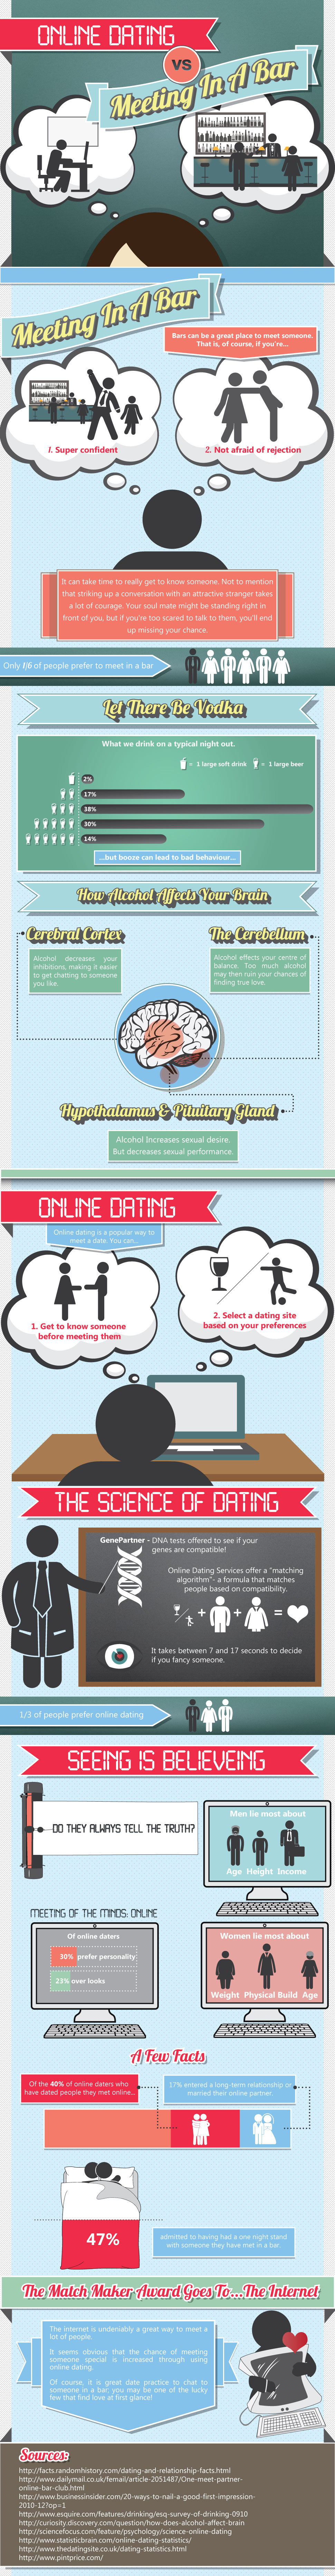 Advantages of Online Dating